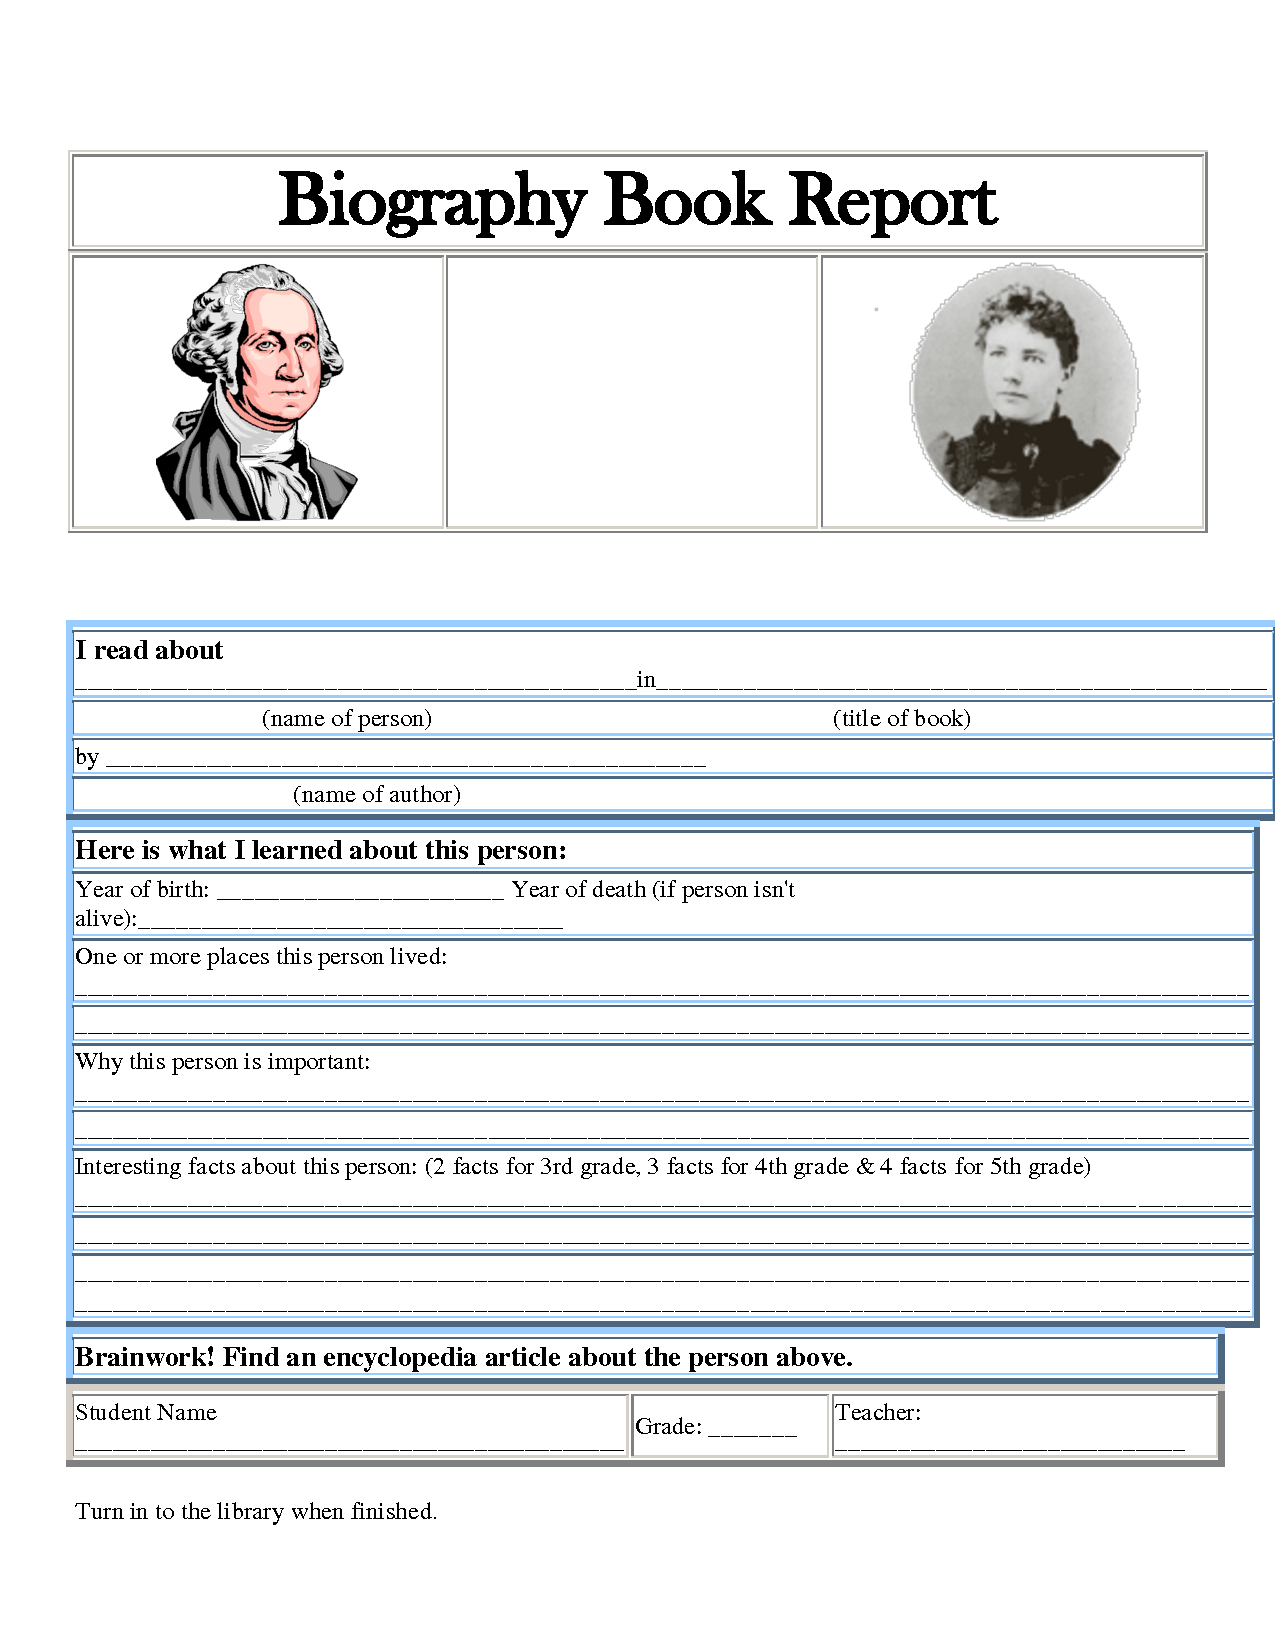 5Th Grade Dol Worksheet | Printable Worksheets And Within Biography Book Report Template